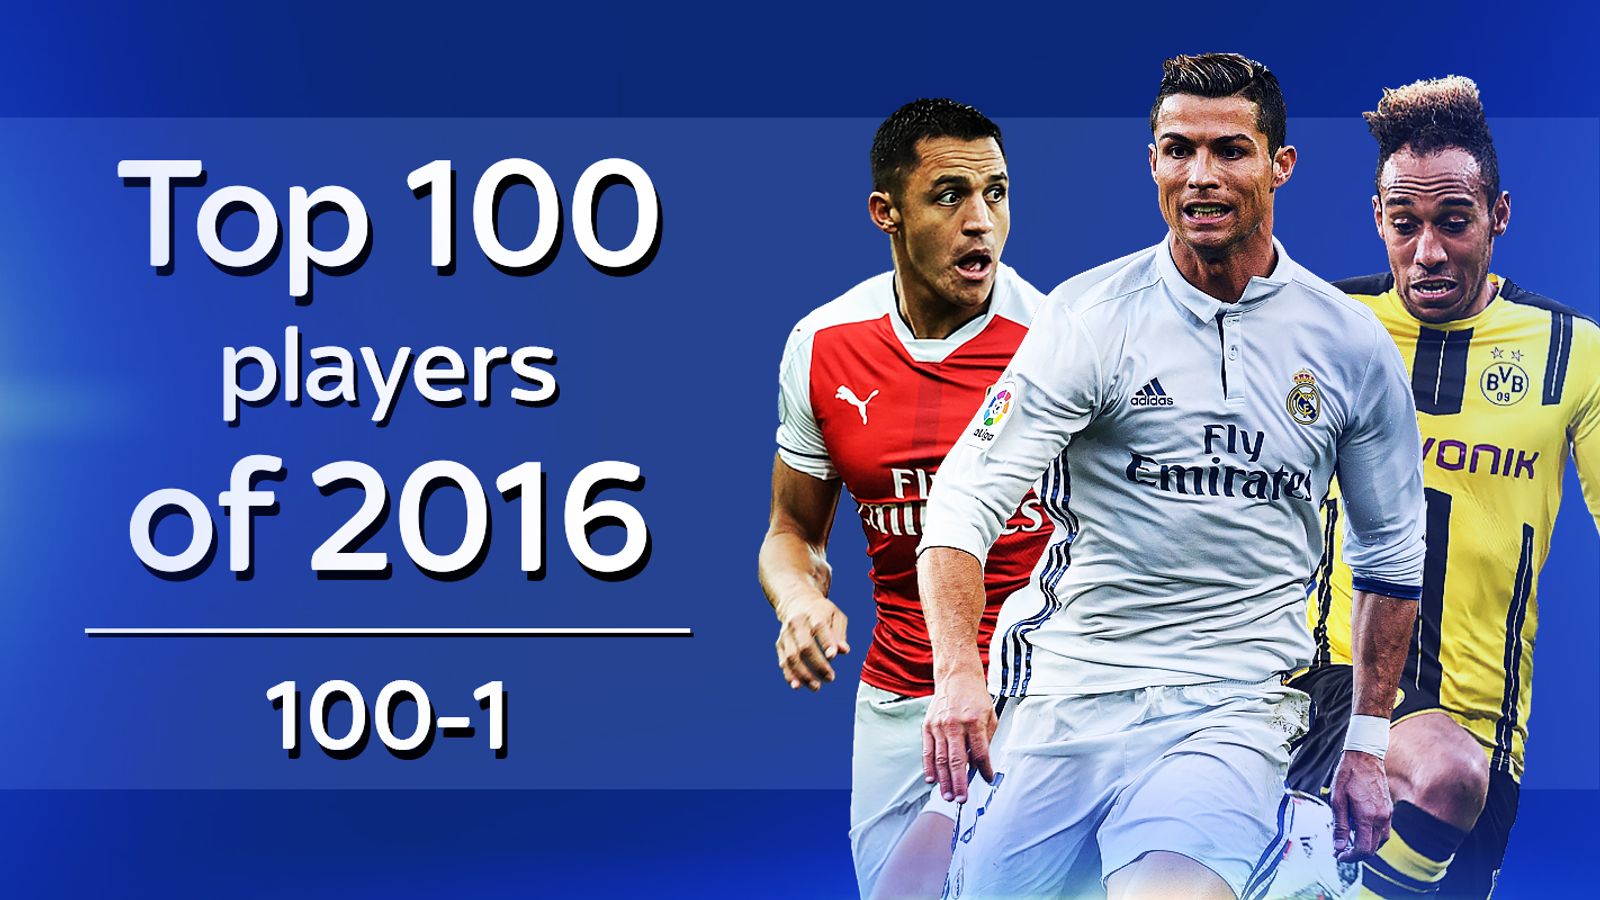 Top 100 players of 2016 Full list as ranked by